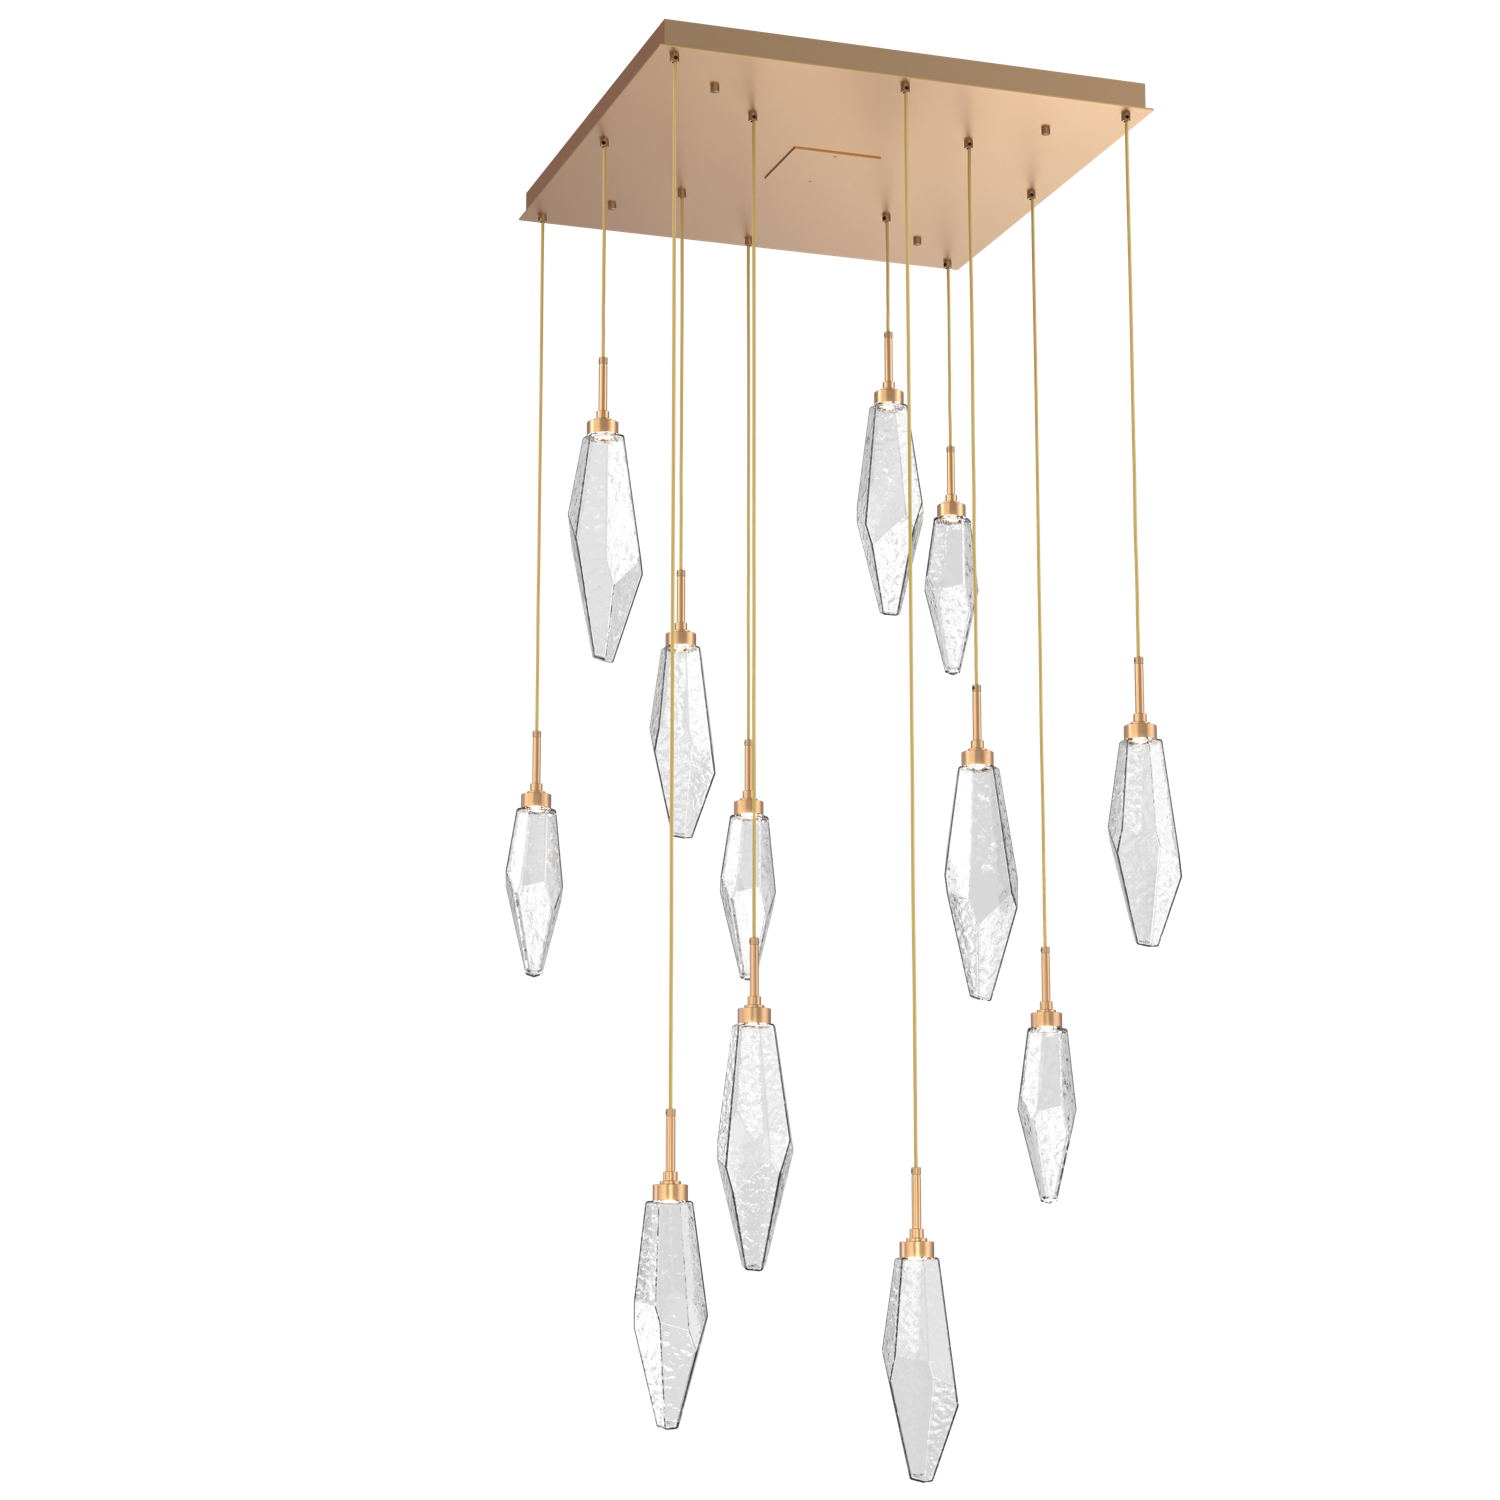 CHB0050-12-NB-CC-Hammerton-Studio-Rock-Crystal-12-light-square-pendant-chandelier-with-novel-brass-finish-and-clear-glass-shades-and-LED-lamping